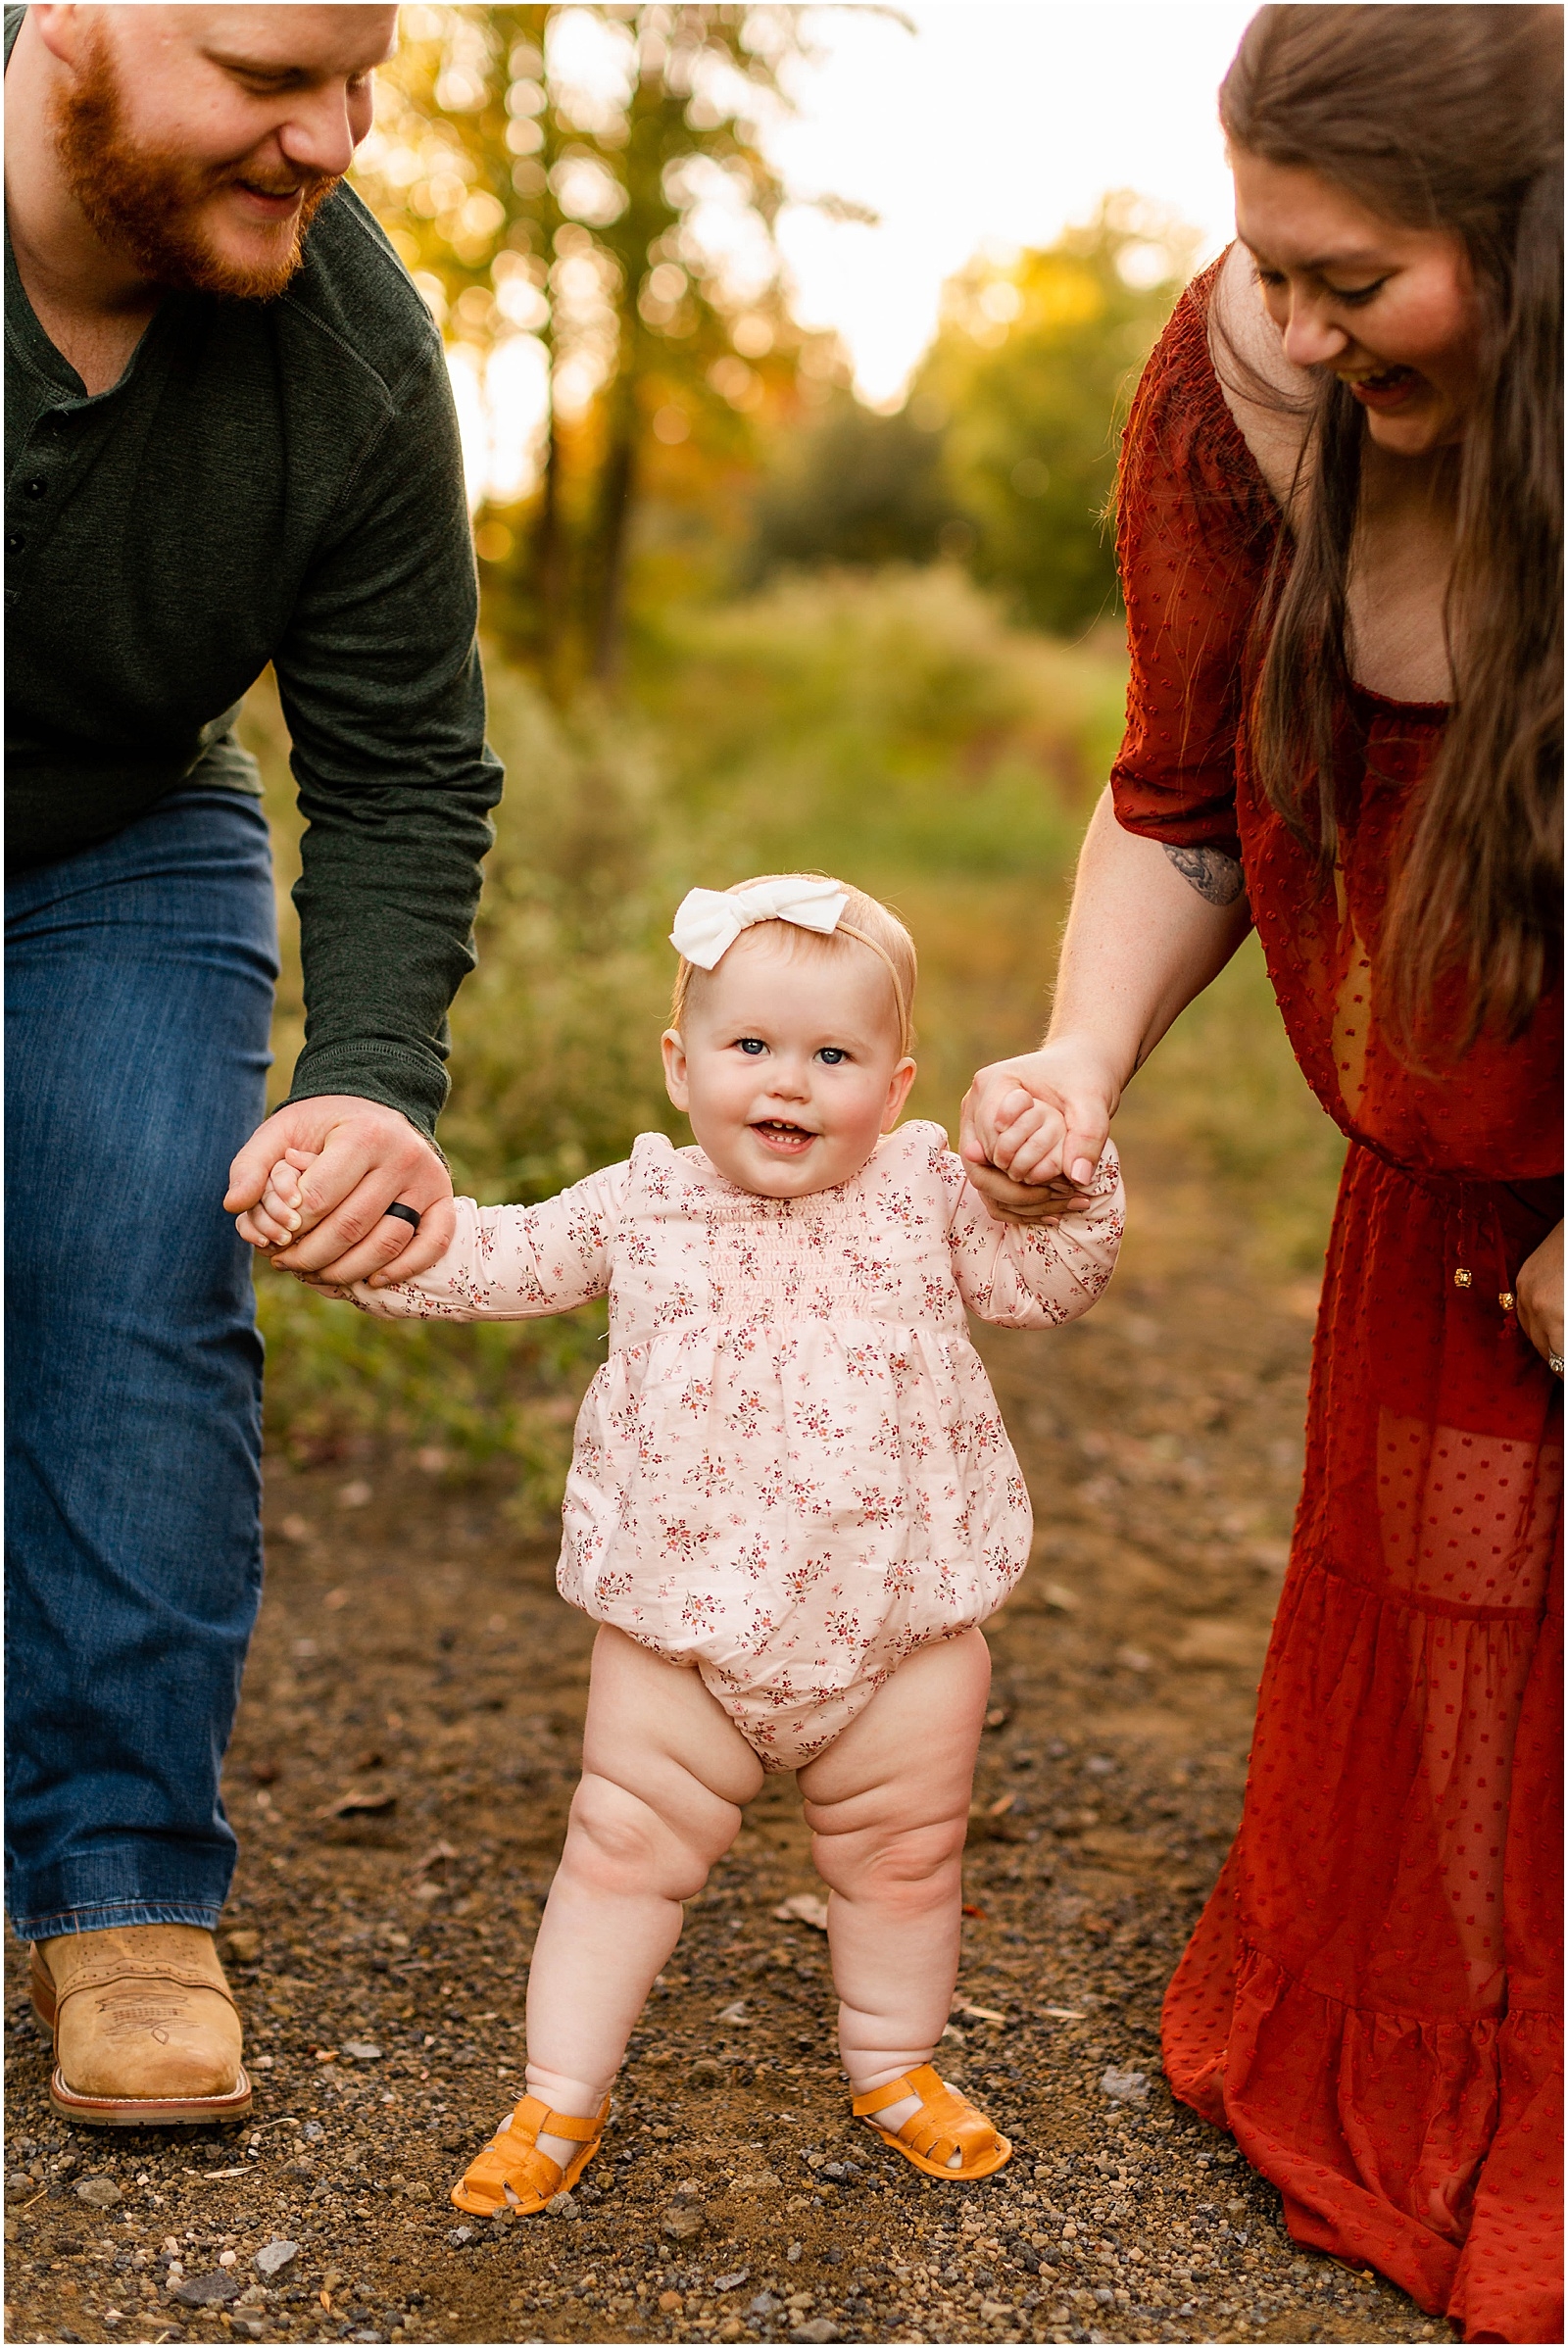 The Peck's Fall Family Session Bret and Brandie Photography | Evansville Indiana Wedding Photographers_0026.jpg